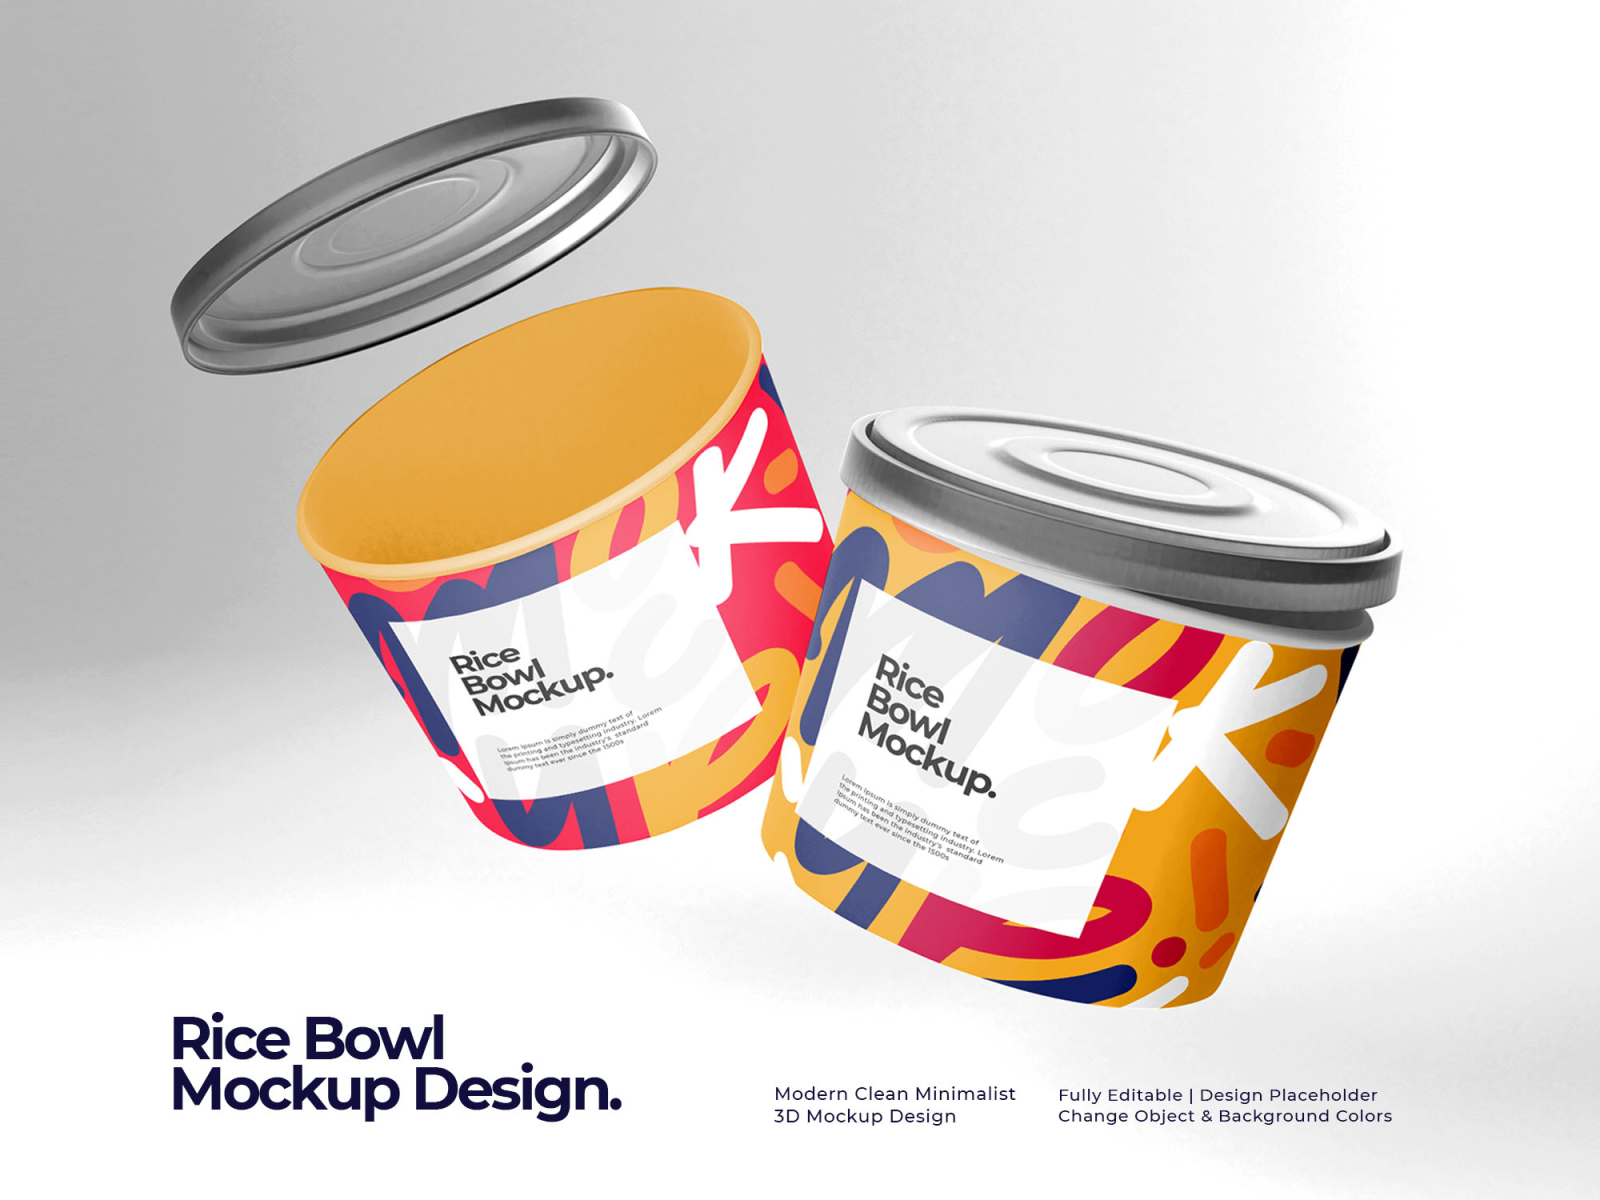 RICE BOWL MOCKUP DESIGN by Fisual 3D Vactory on Dribbble